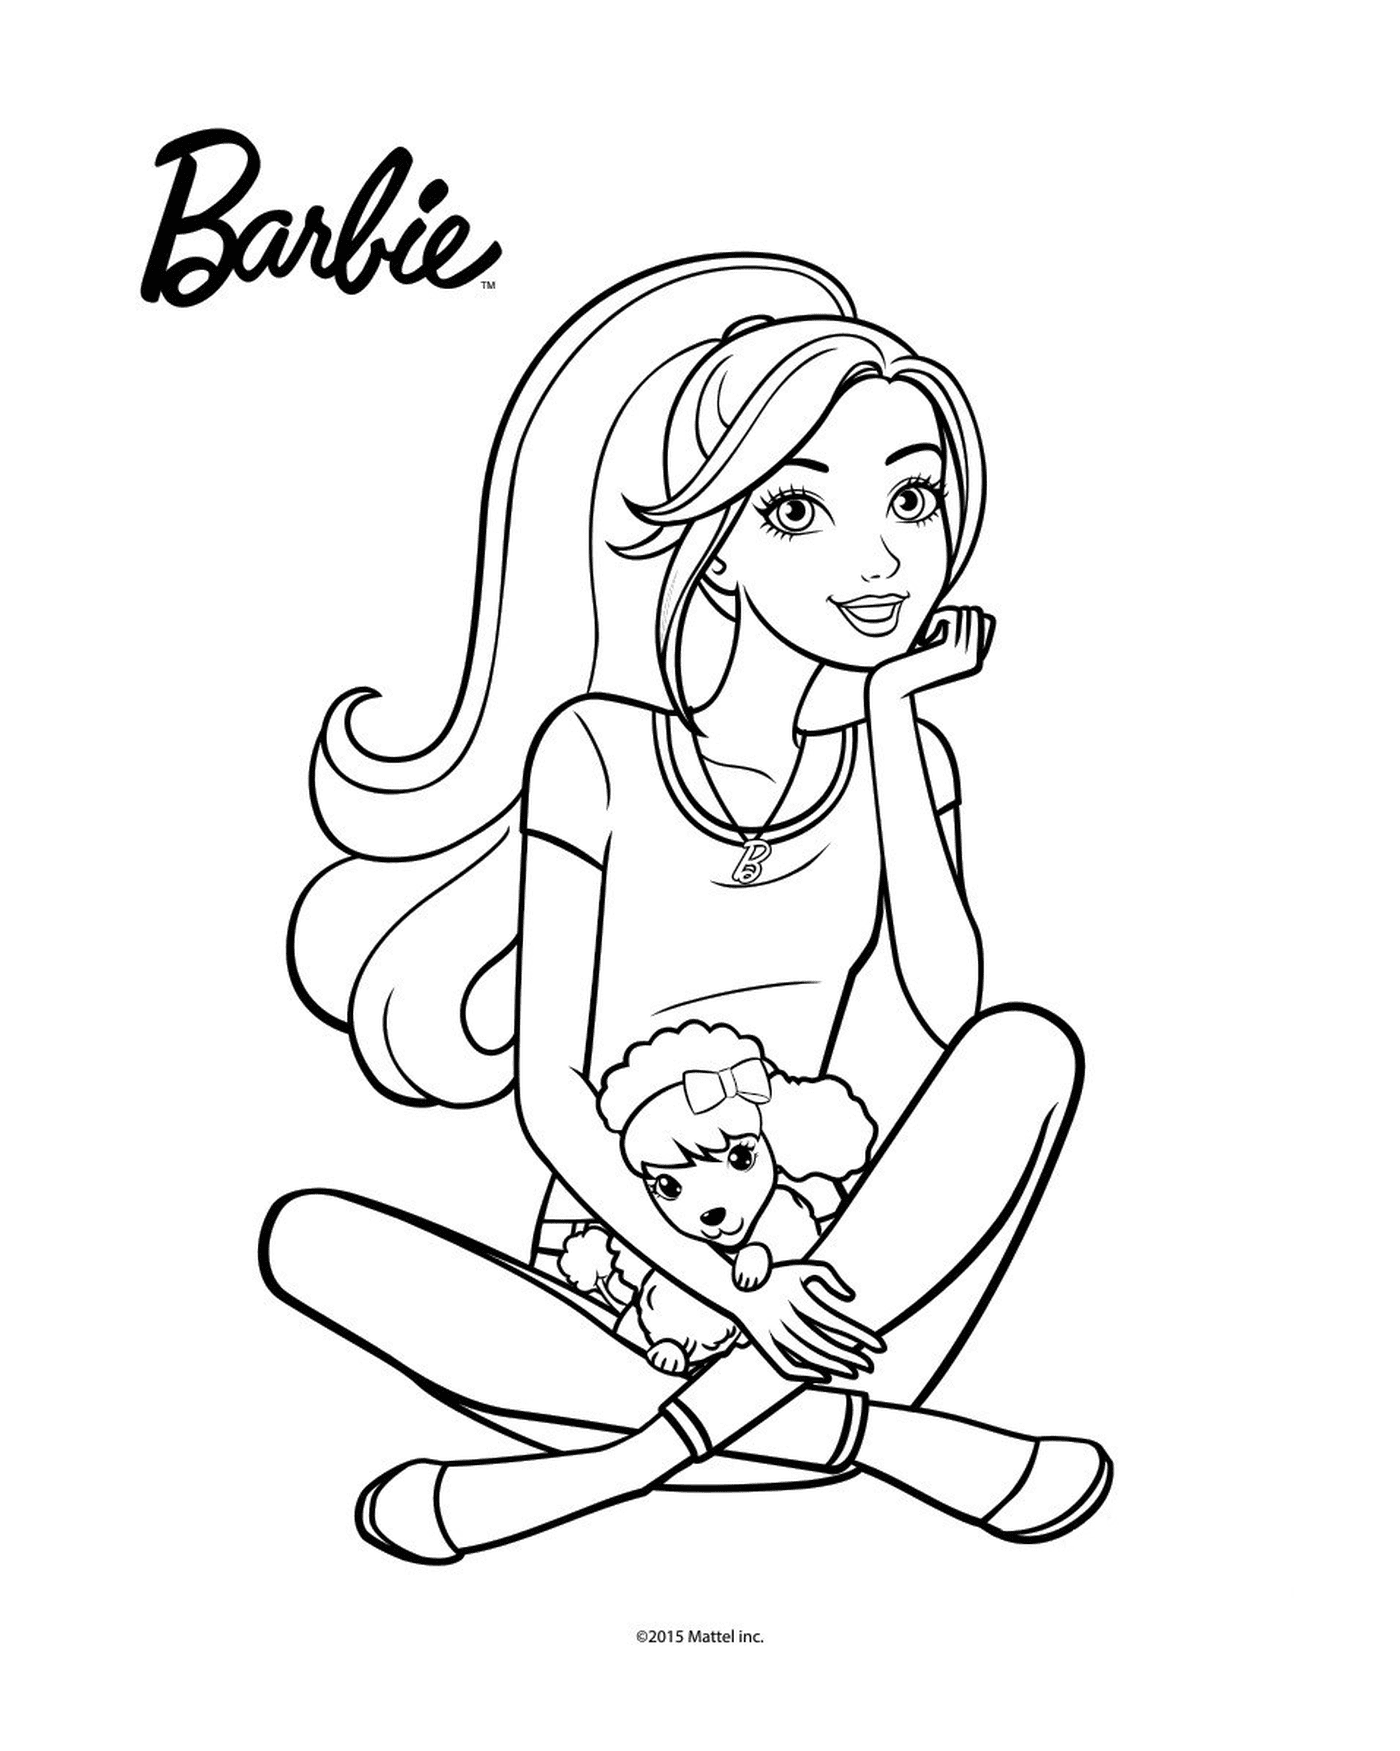  Barbie sitting on the floor holding a doll 